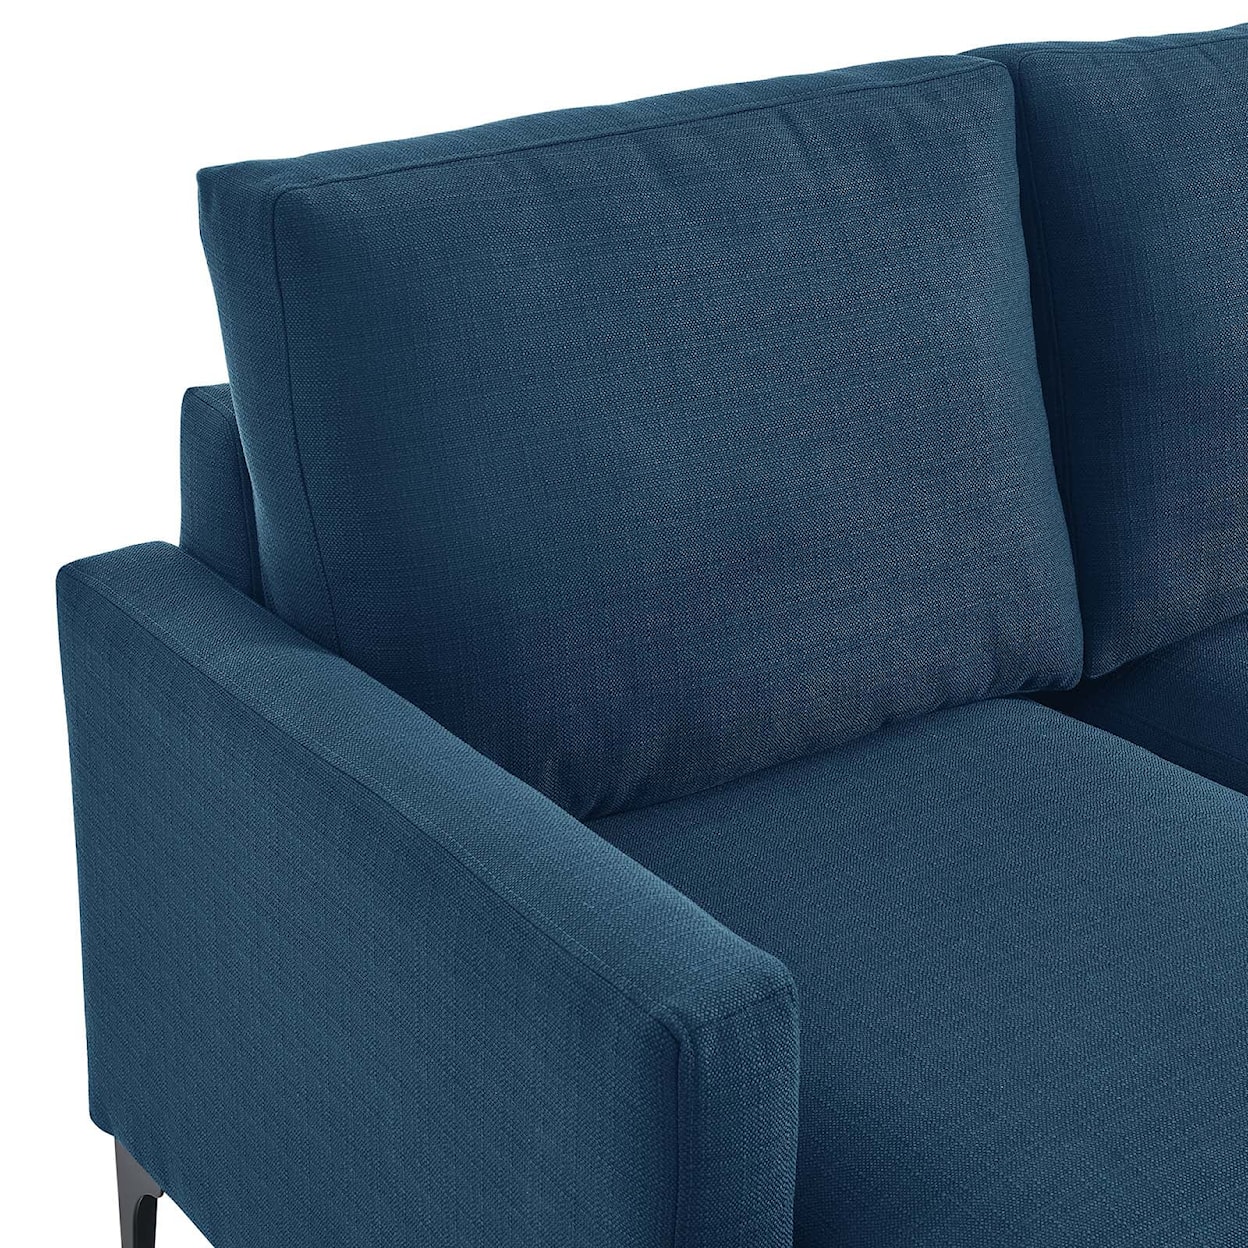 Modway Evermore Two-Seater Loveseat